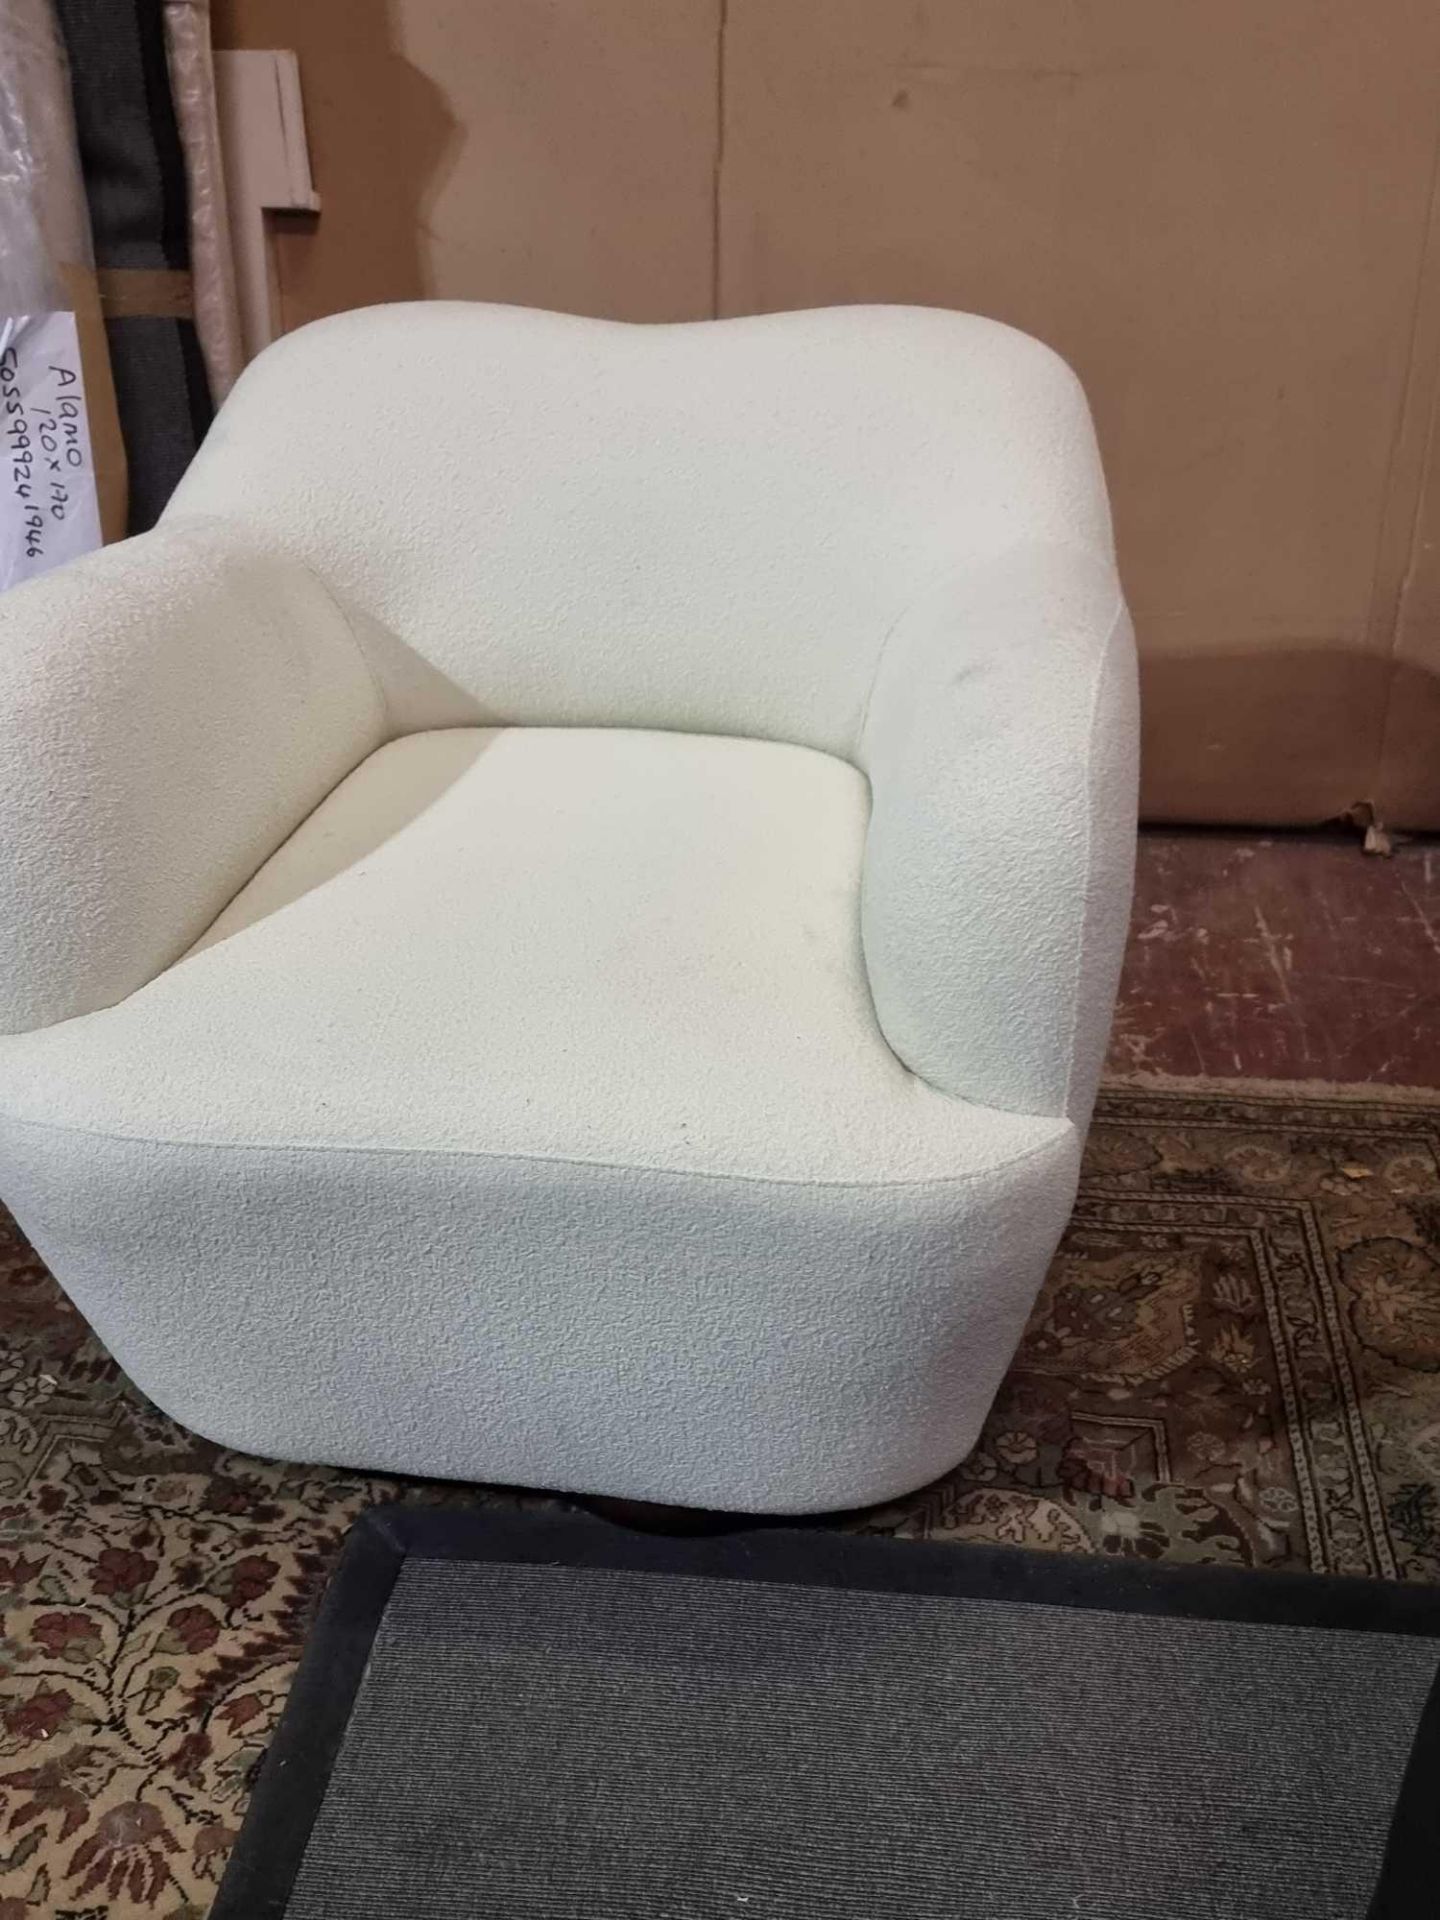 Savoy Boucle Armchair- A Swivel Chair In Contemporary Style Dressed In Fine Snow White Boucle Fabric - Image 3 of 6